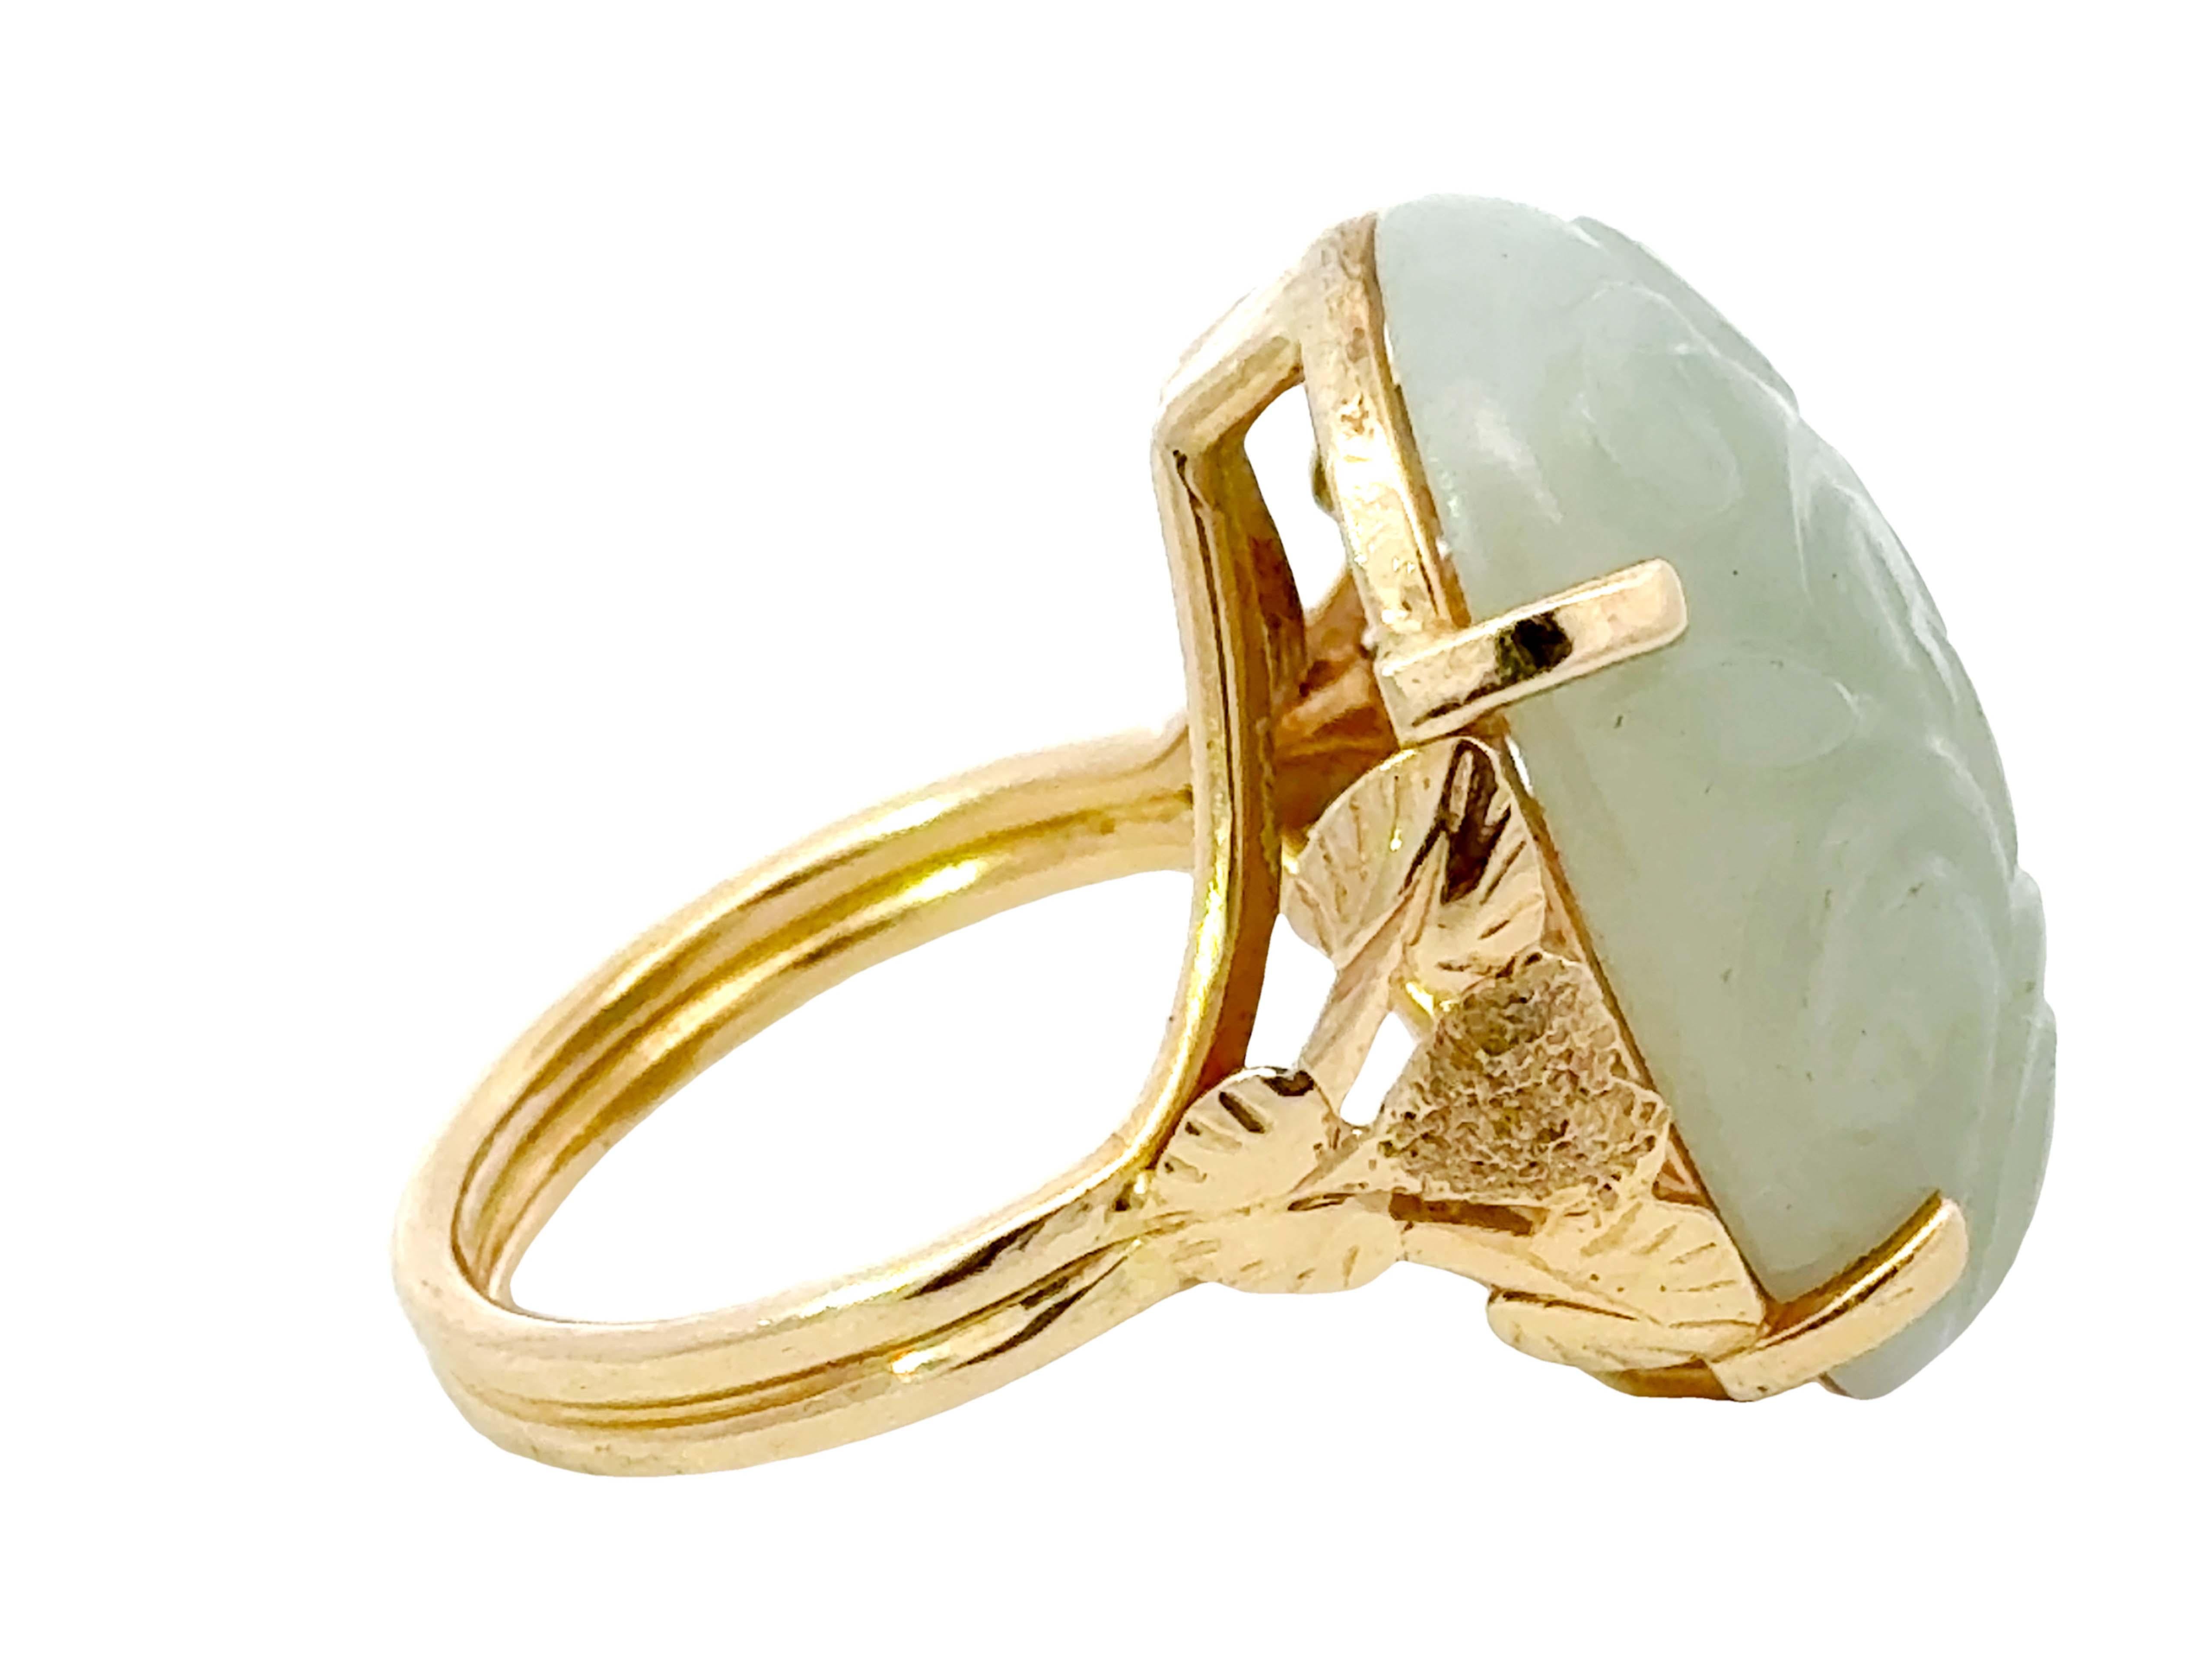 Oval Carved Nephrite Jade Ring 14K Yellow Gold In Excellent Condition For Sale In Honolulu, HI